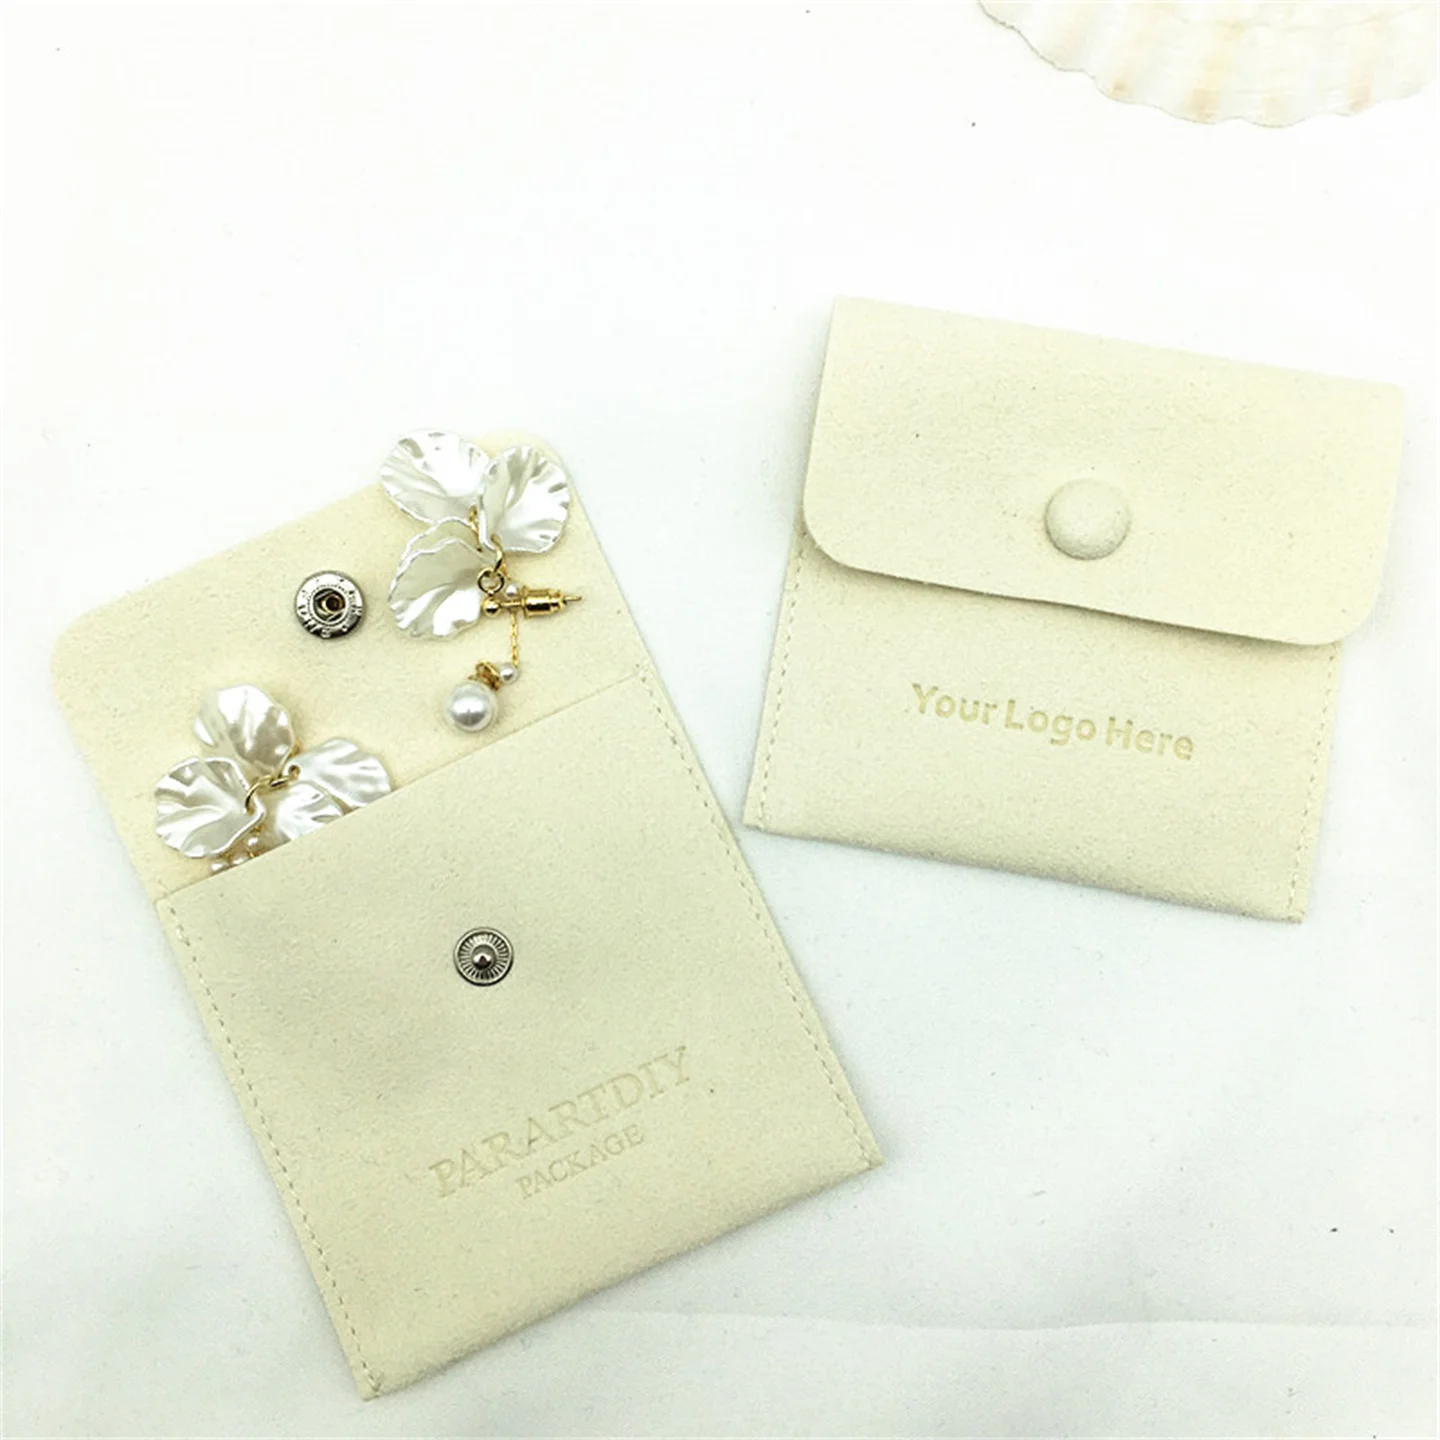 50 white beige snap bags can be personalized logo printing custom size earring packaging bag necklace ring gift bag 50 white beige snap bags can be personalized logo printing custom size earring packaging bag necklace ring gift bag